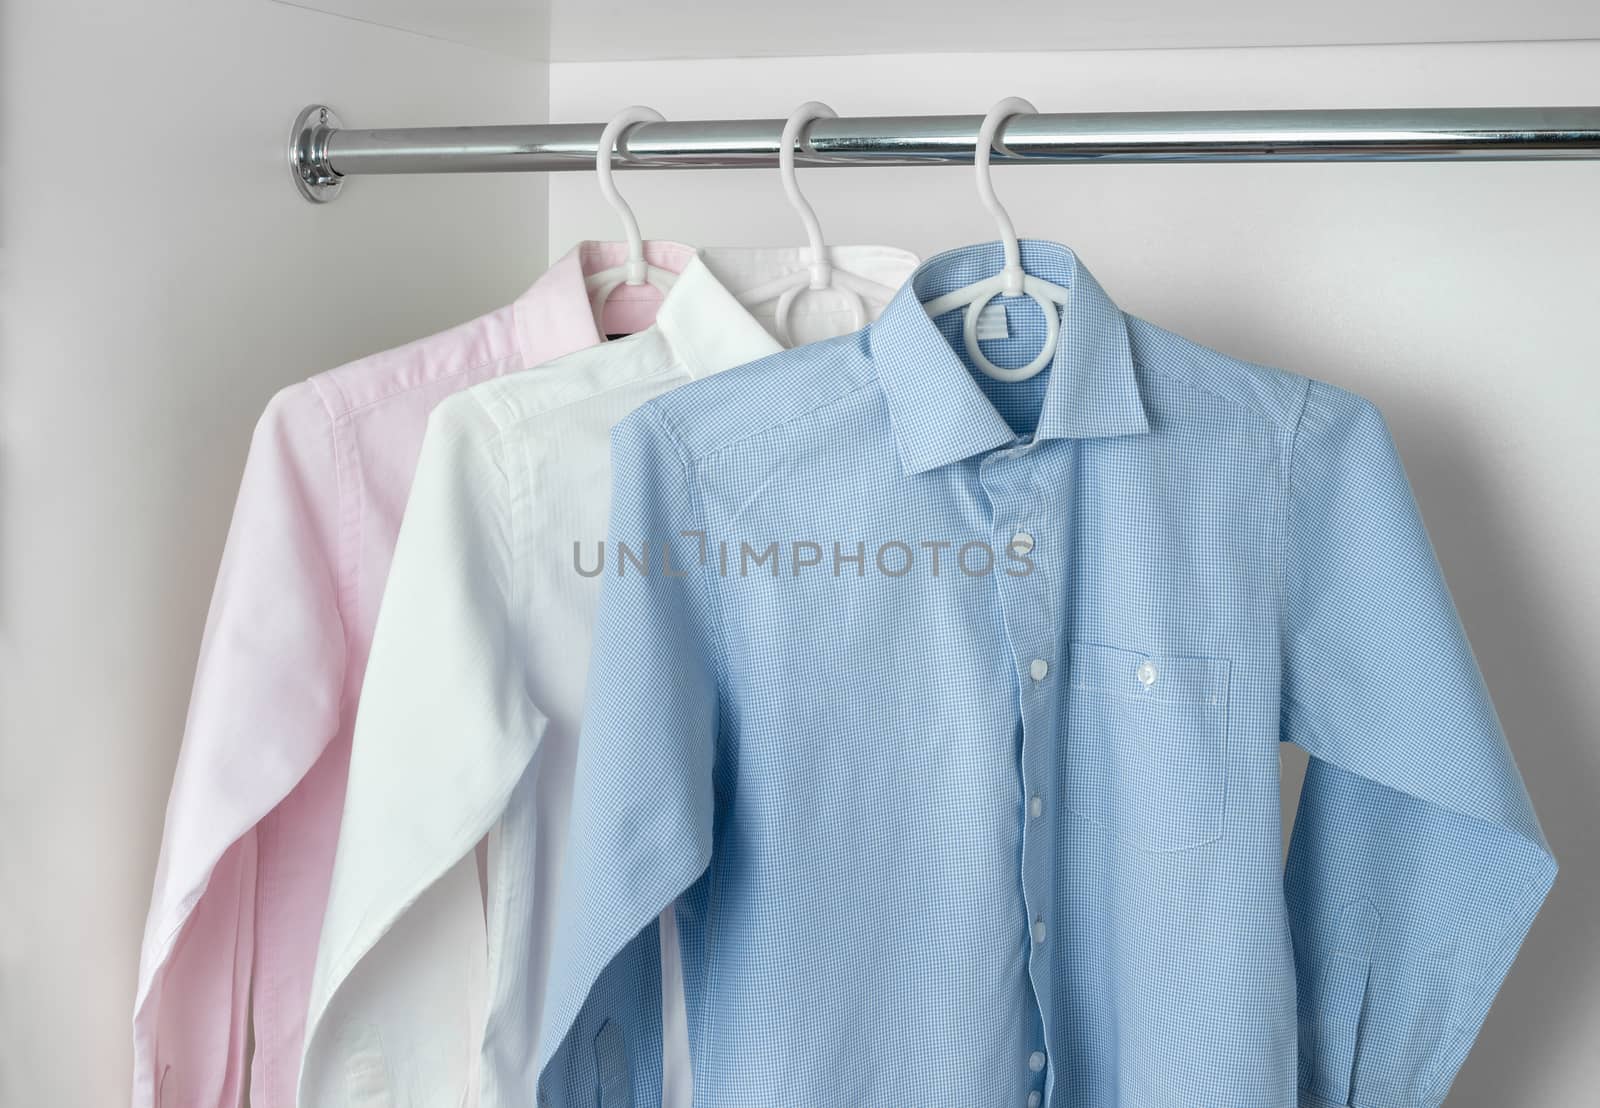 white, blue and pink clean ironed men's shirts hanging on hangers in the white wardrobe